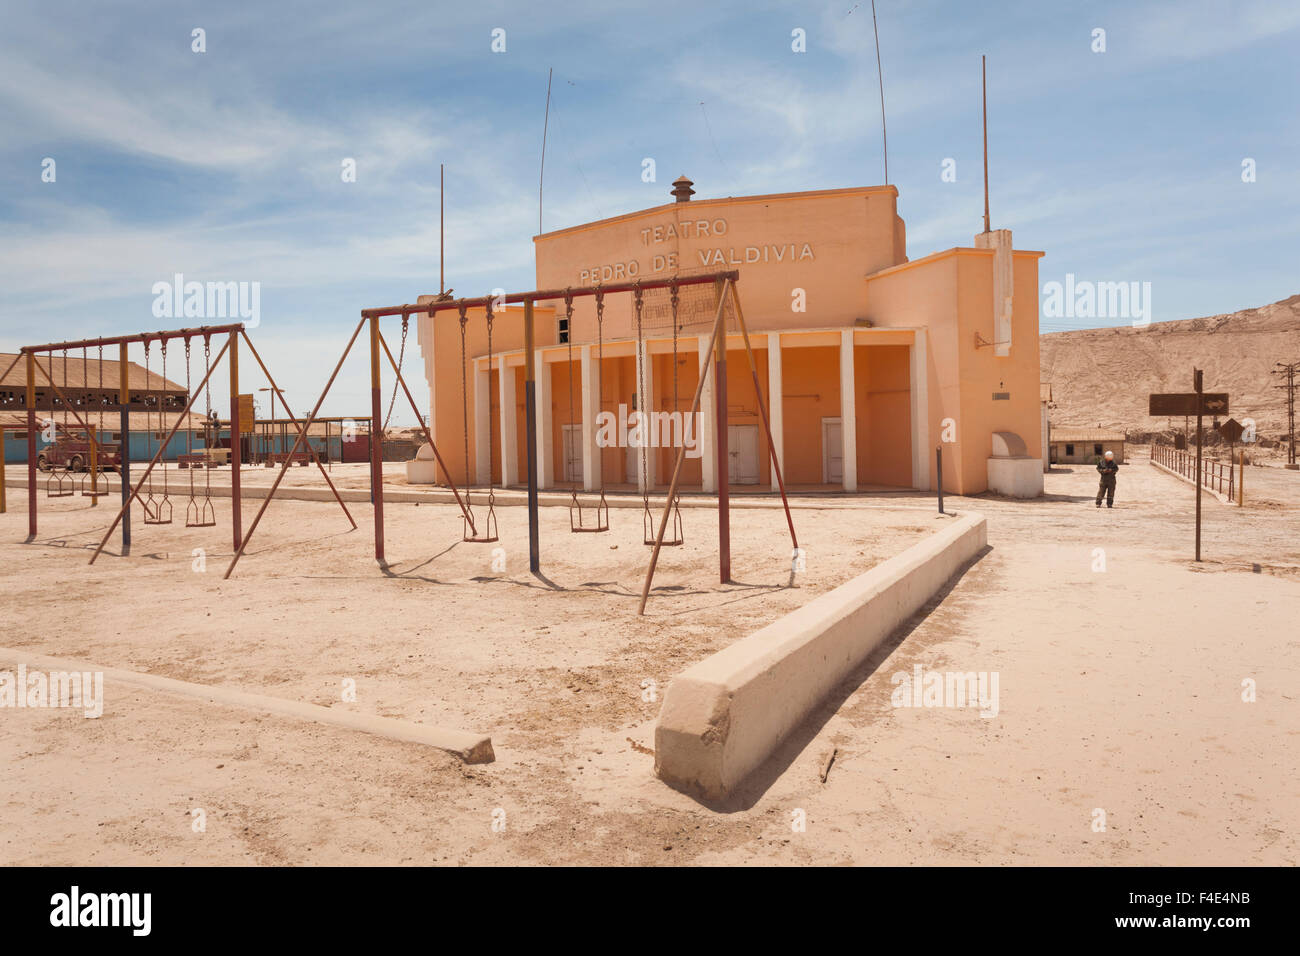 Chile, Officina Pedro de Valdivia, former saltpeter mining ghost town, theater. Stock Photo